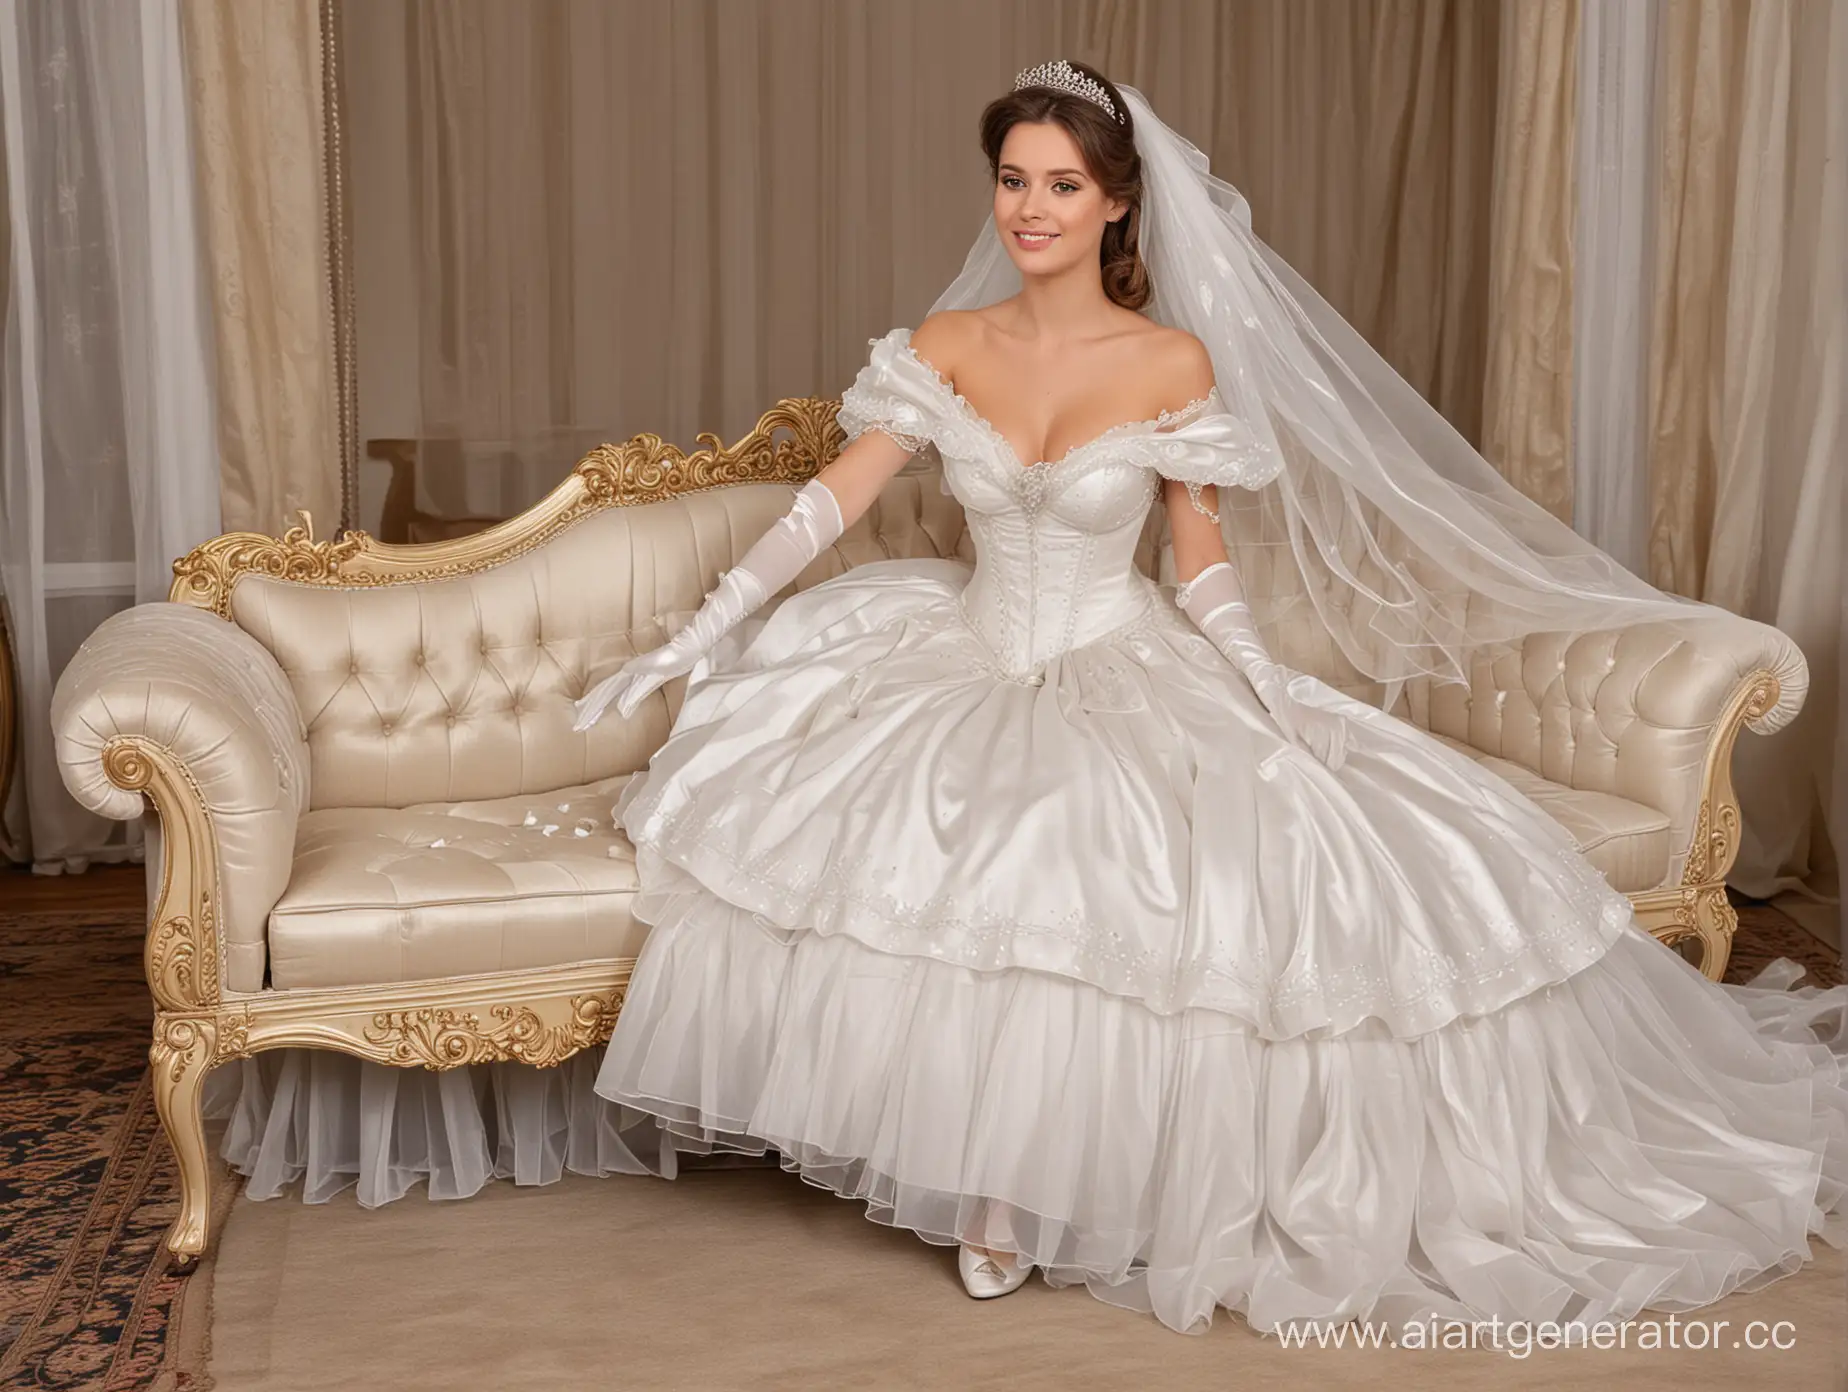 Elegant-25YearOld-Bride-Princess-in-Luxurious-Dress-on-Palace-Couch